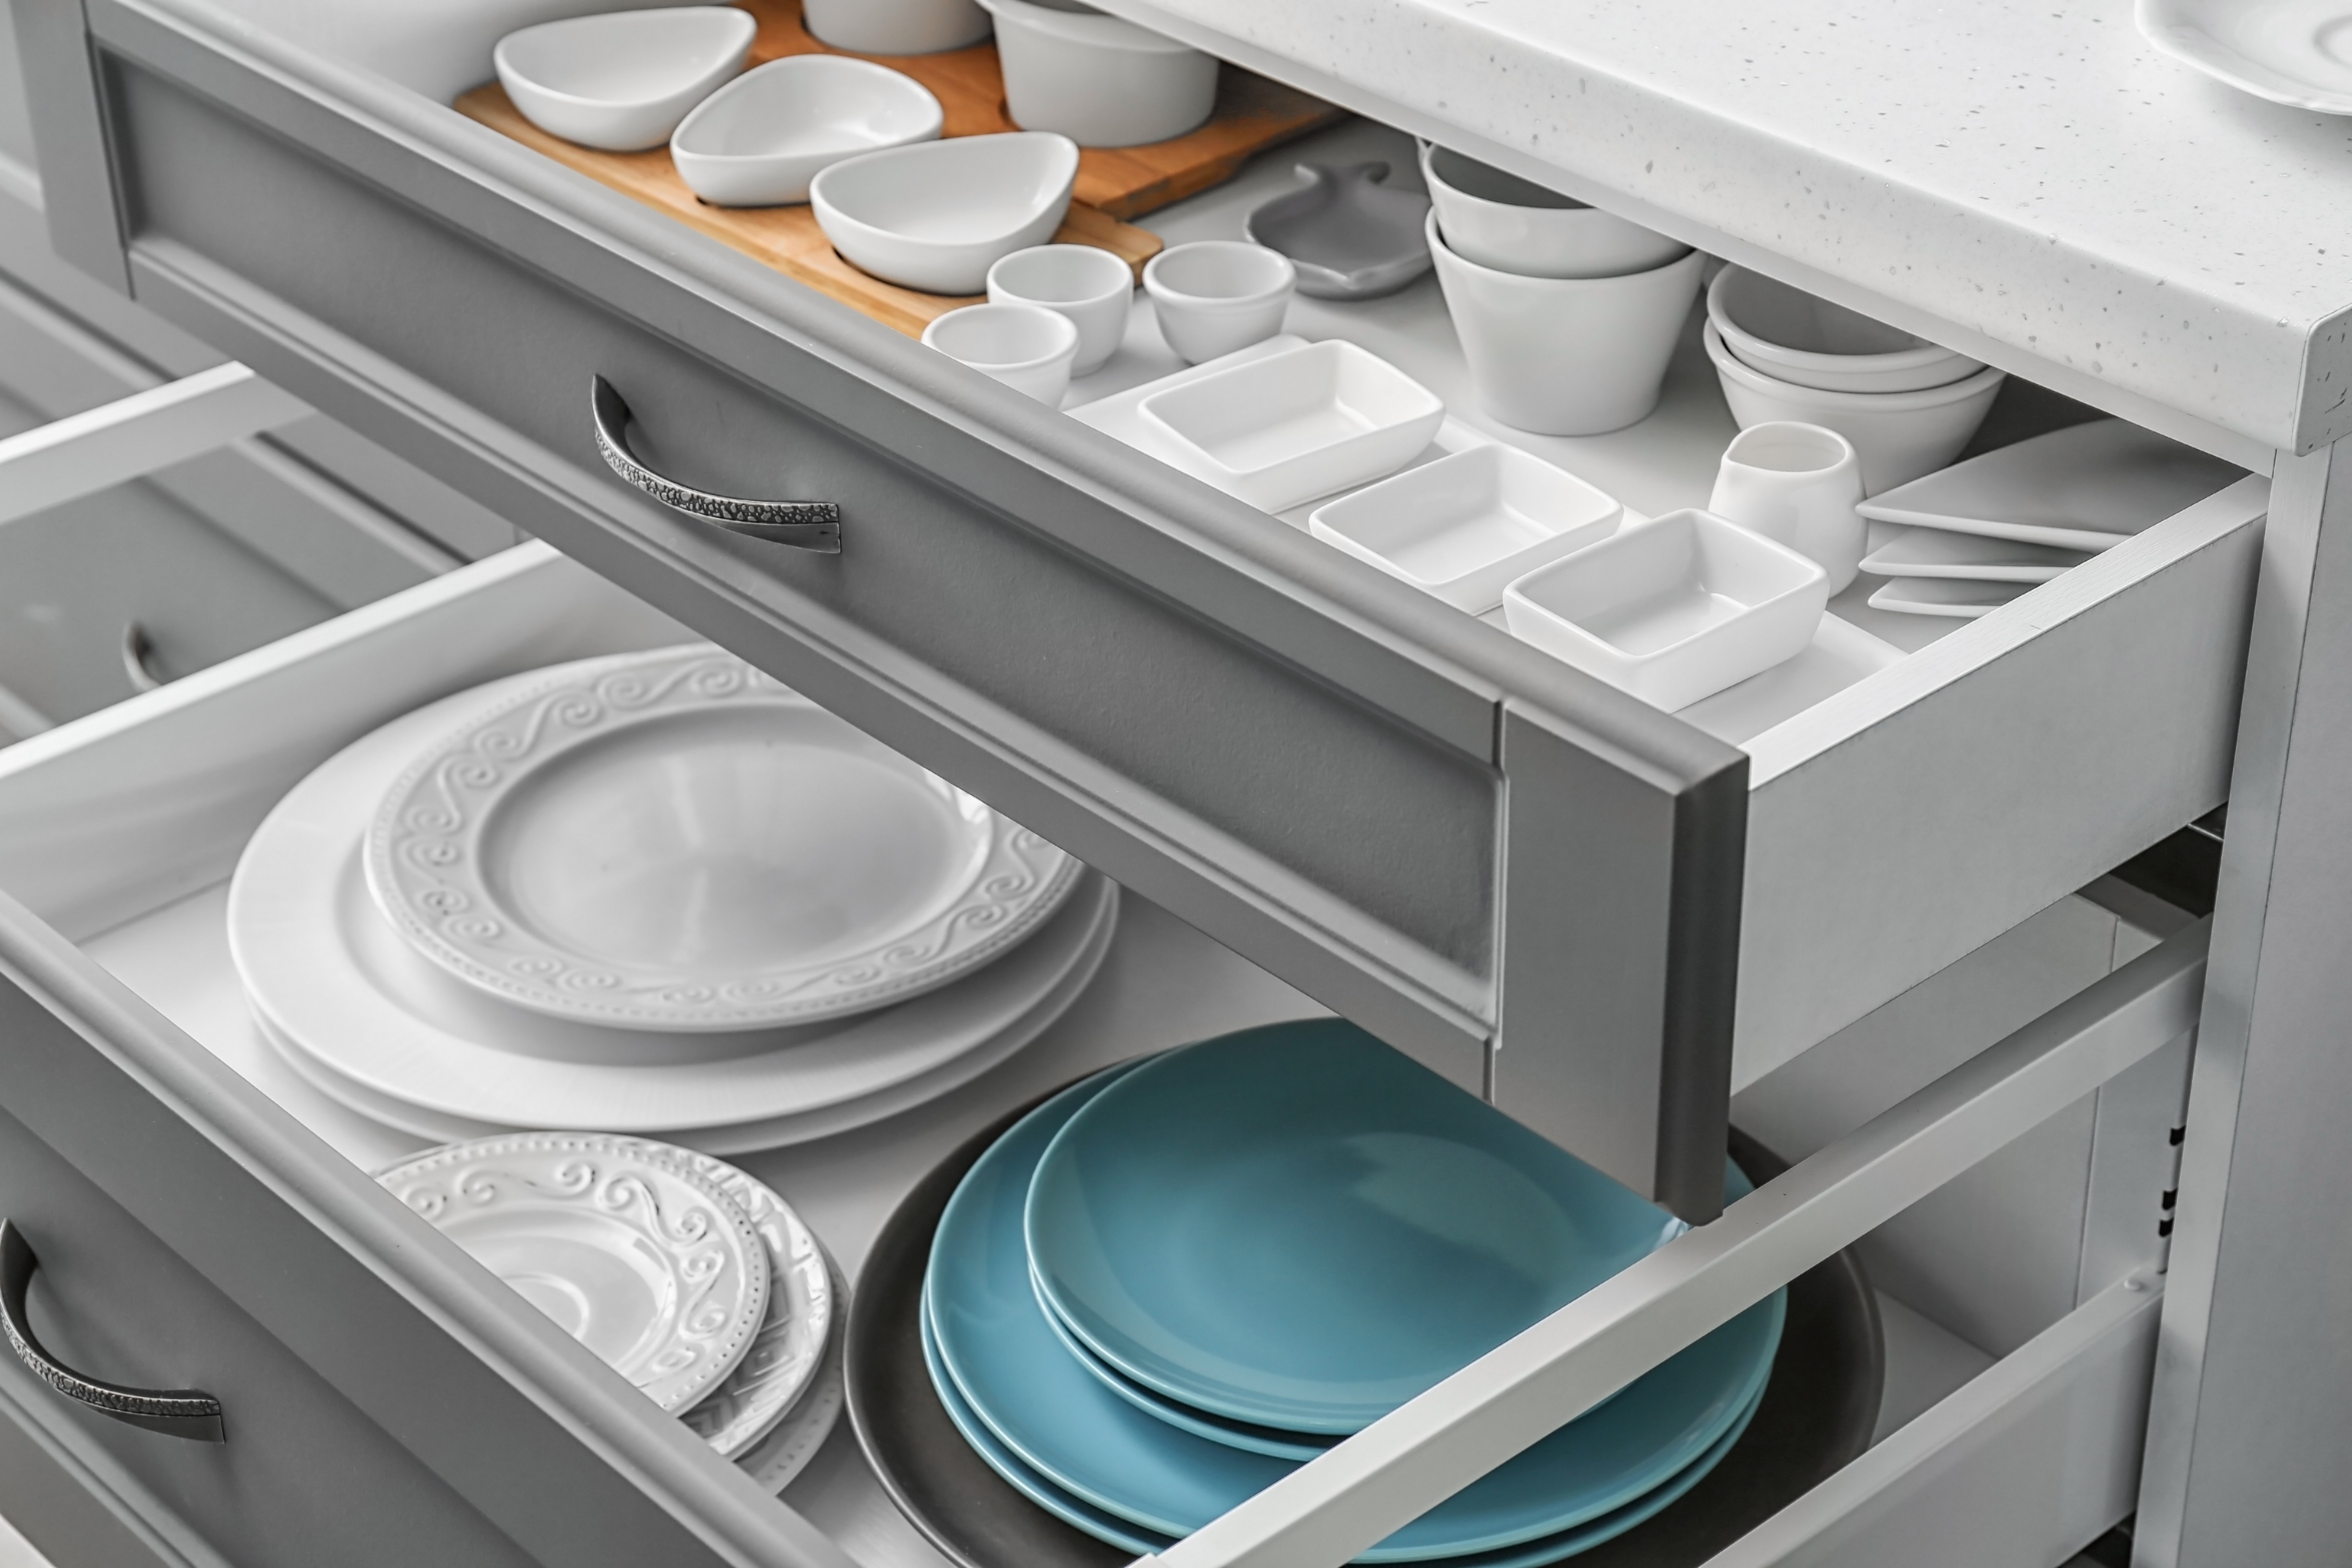 Set of tableware in kitchen drawers | Pierce Carpet Mill Outlet